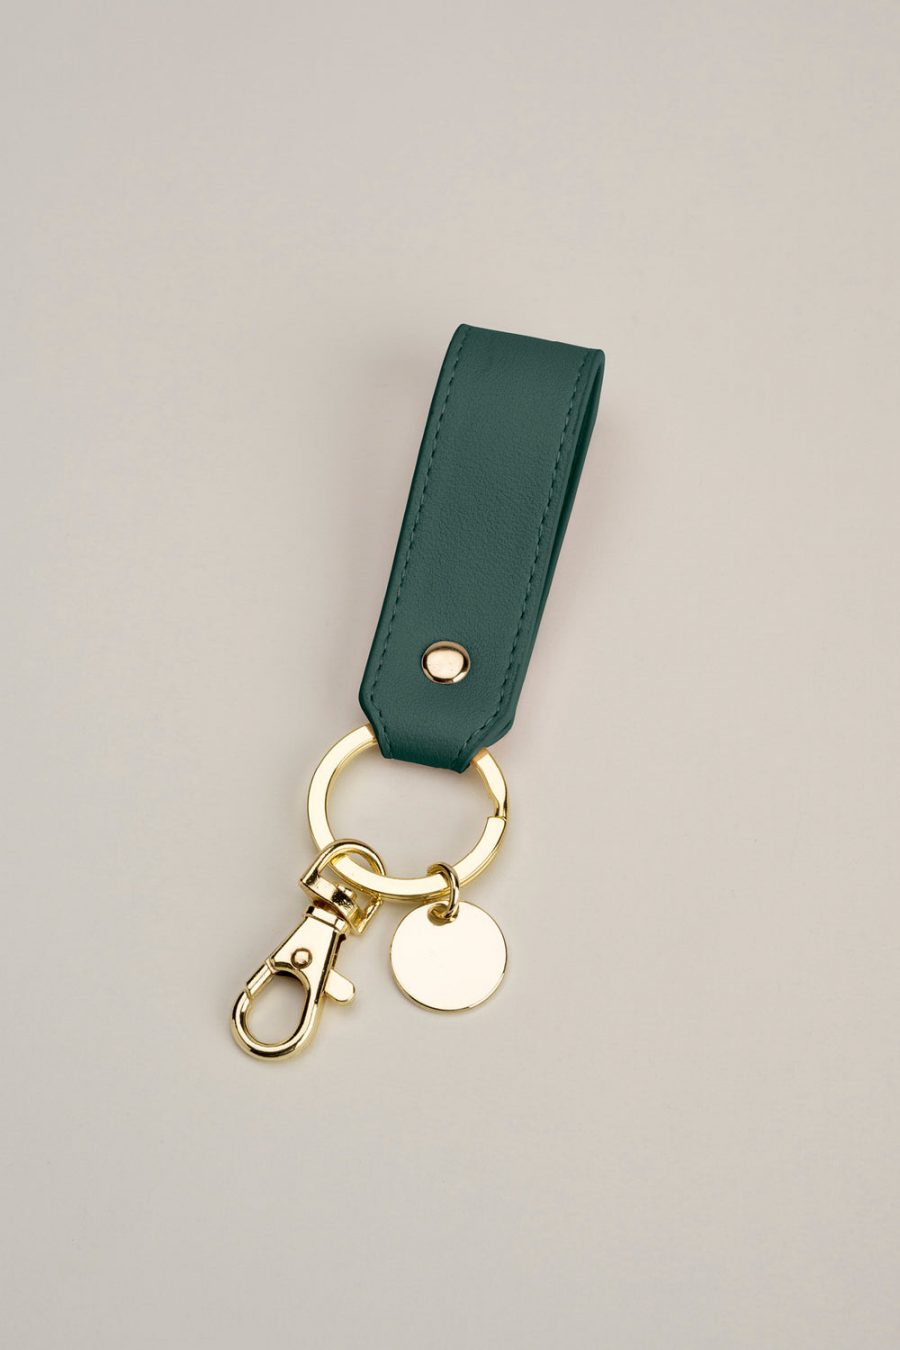 The eleventh key ring strap Green